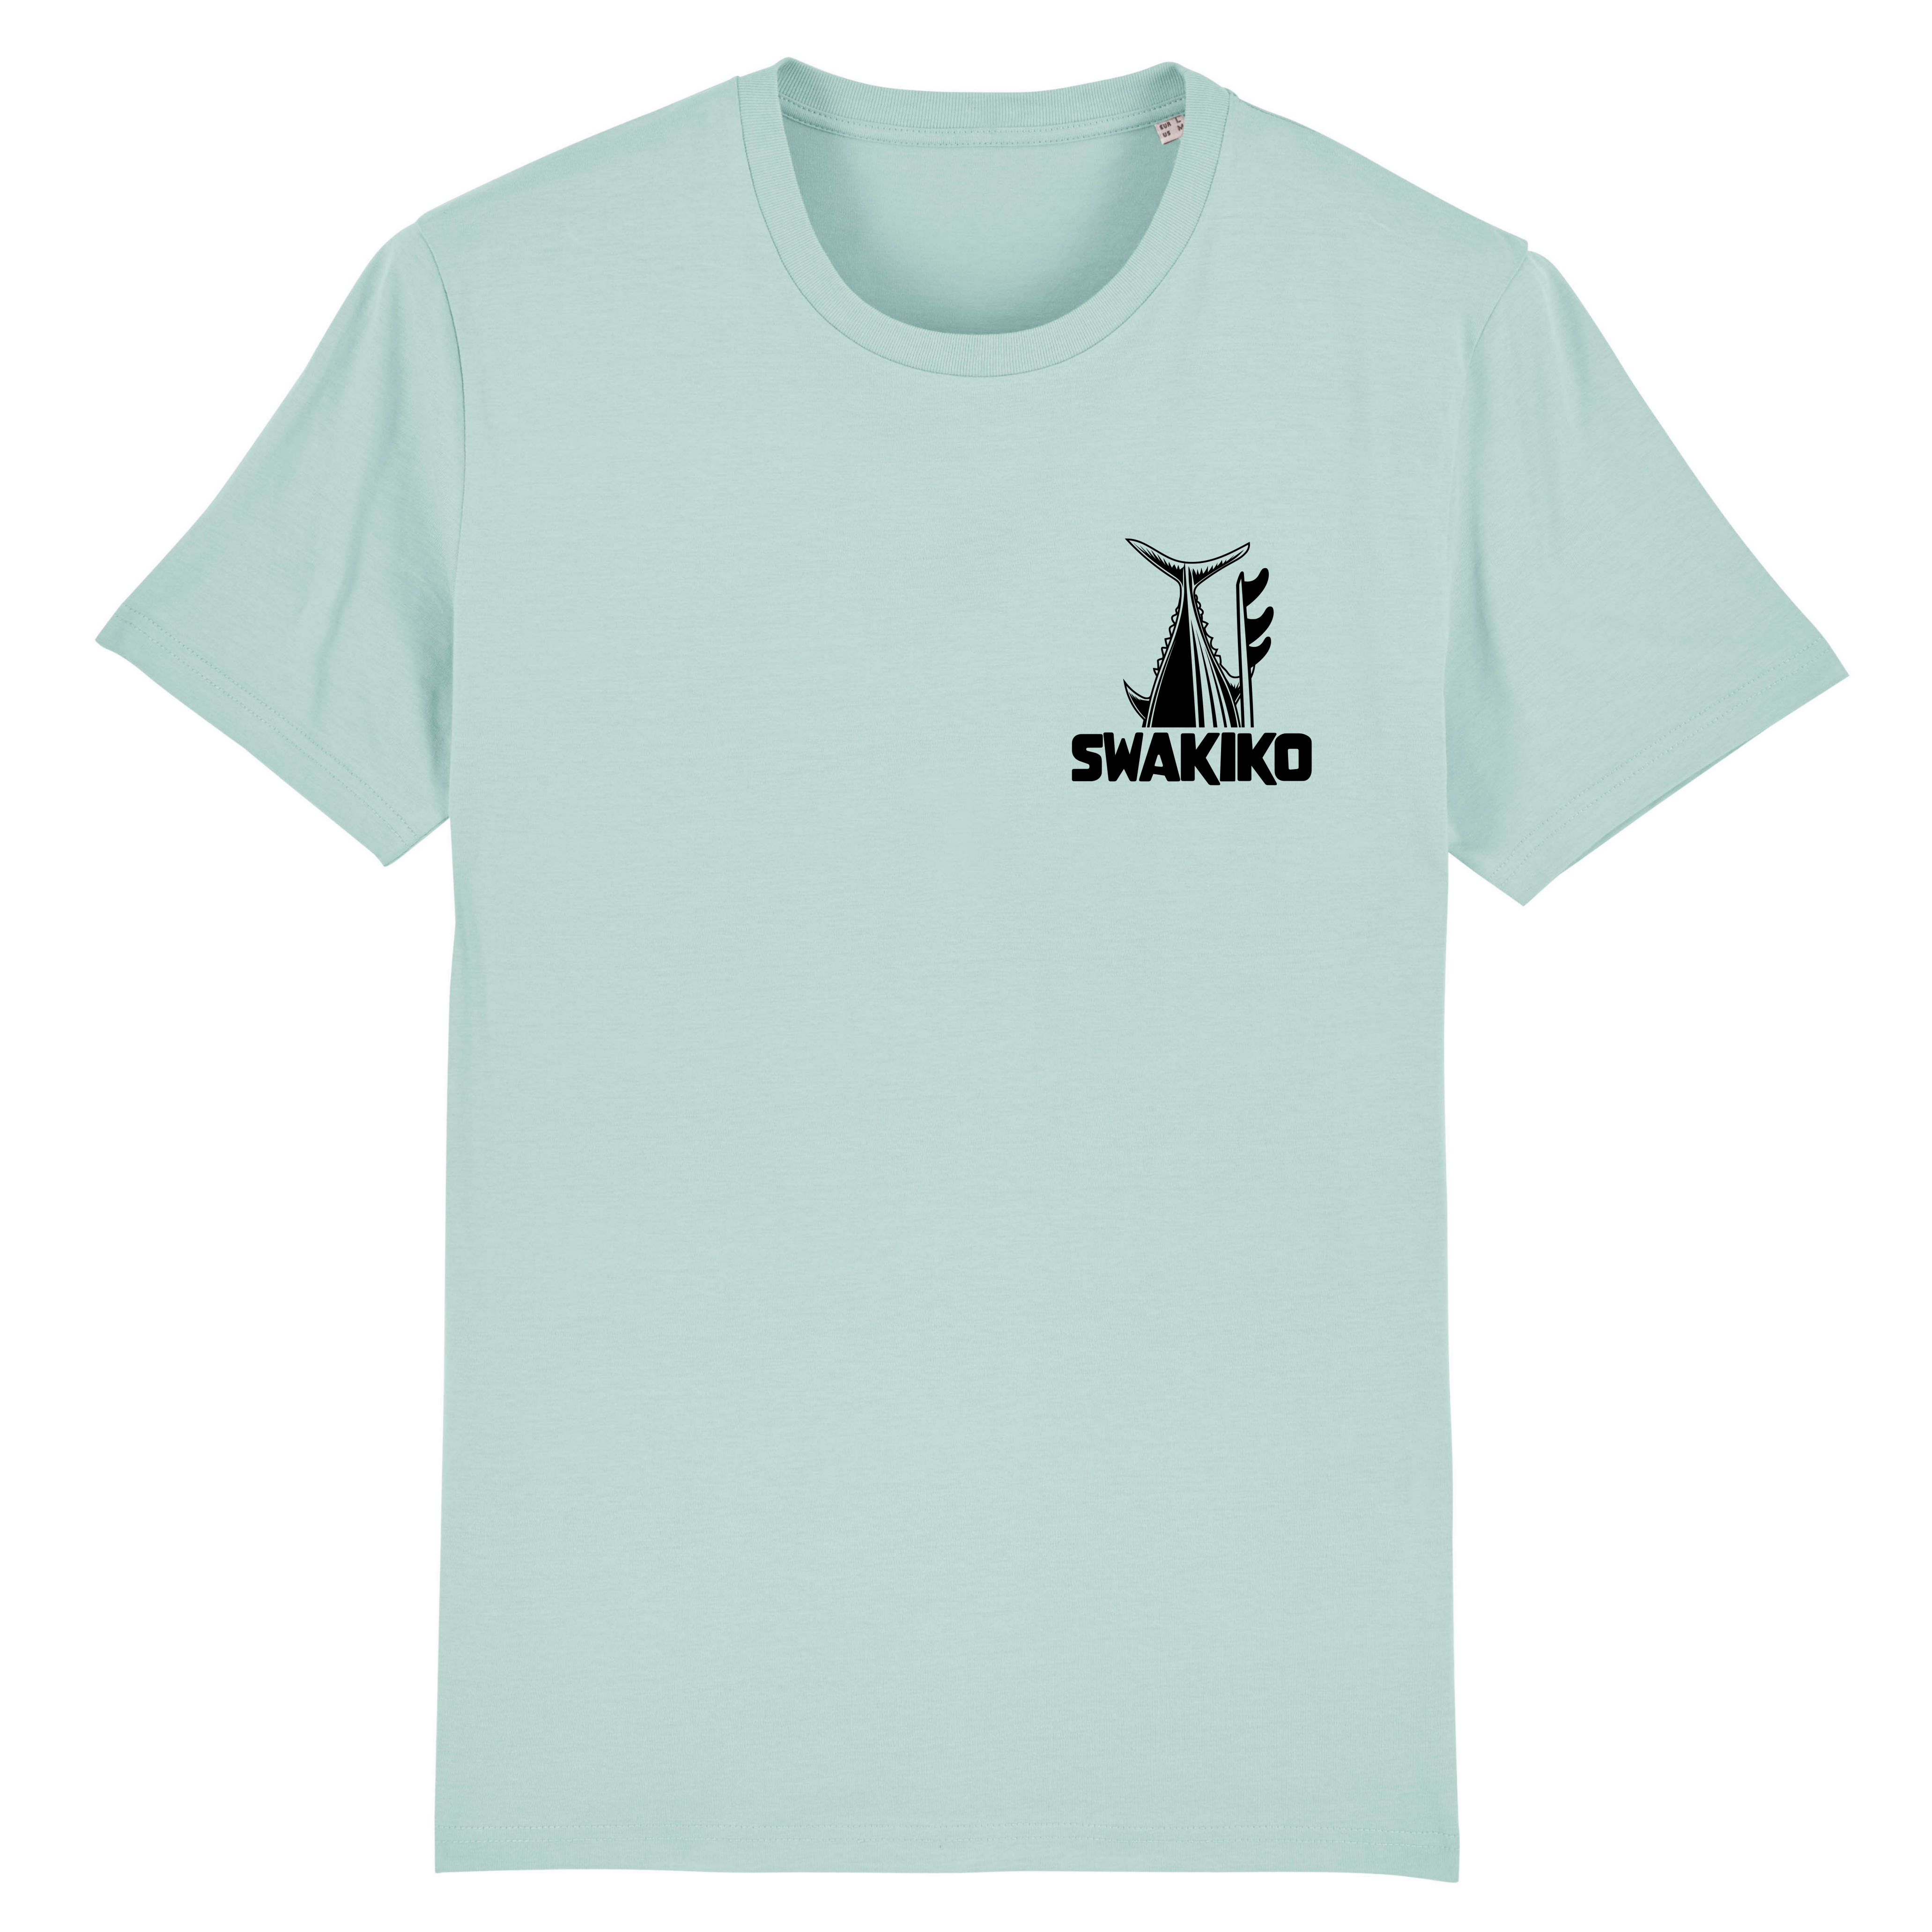 Surfing Tuna T-shirt, turquoise front